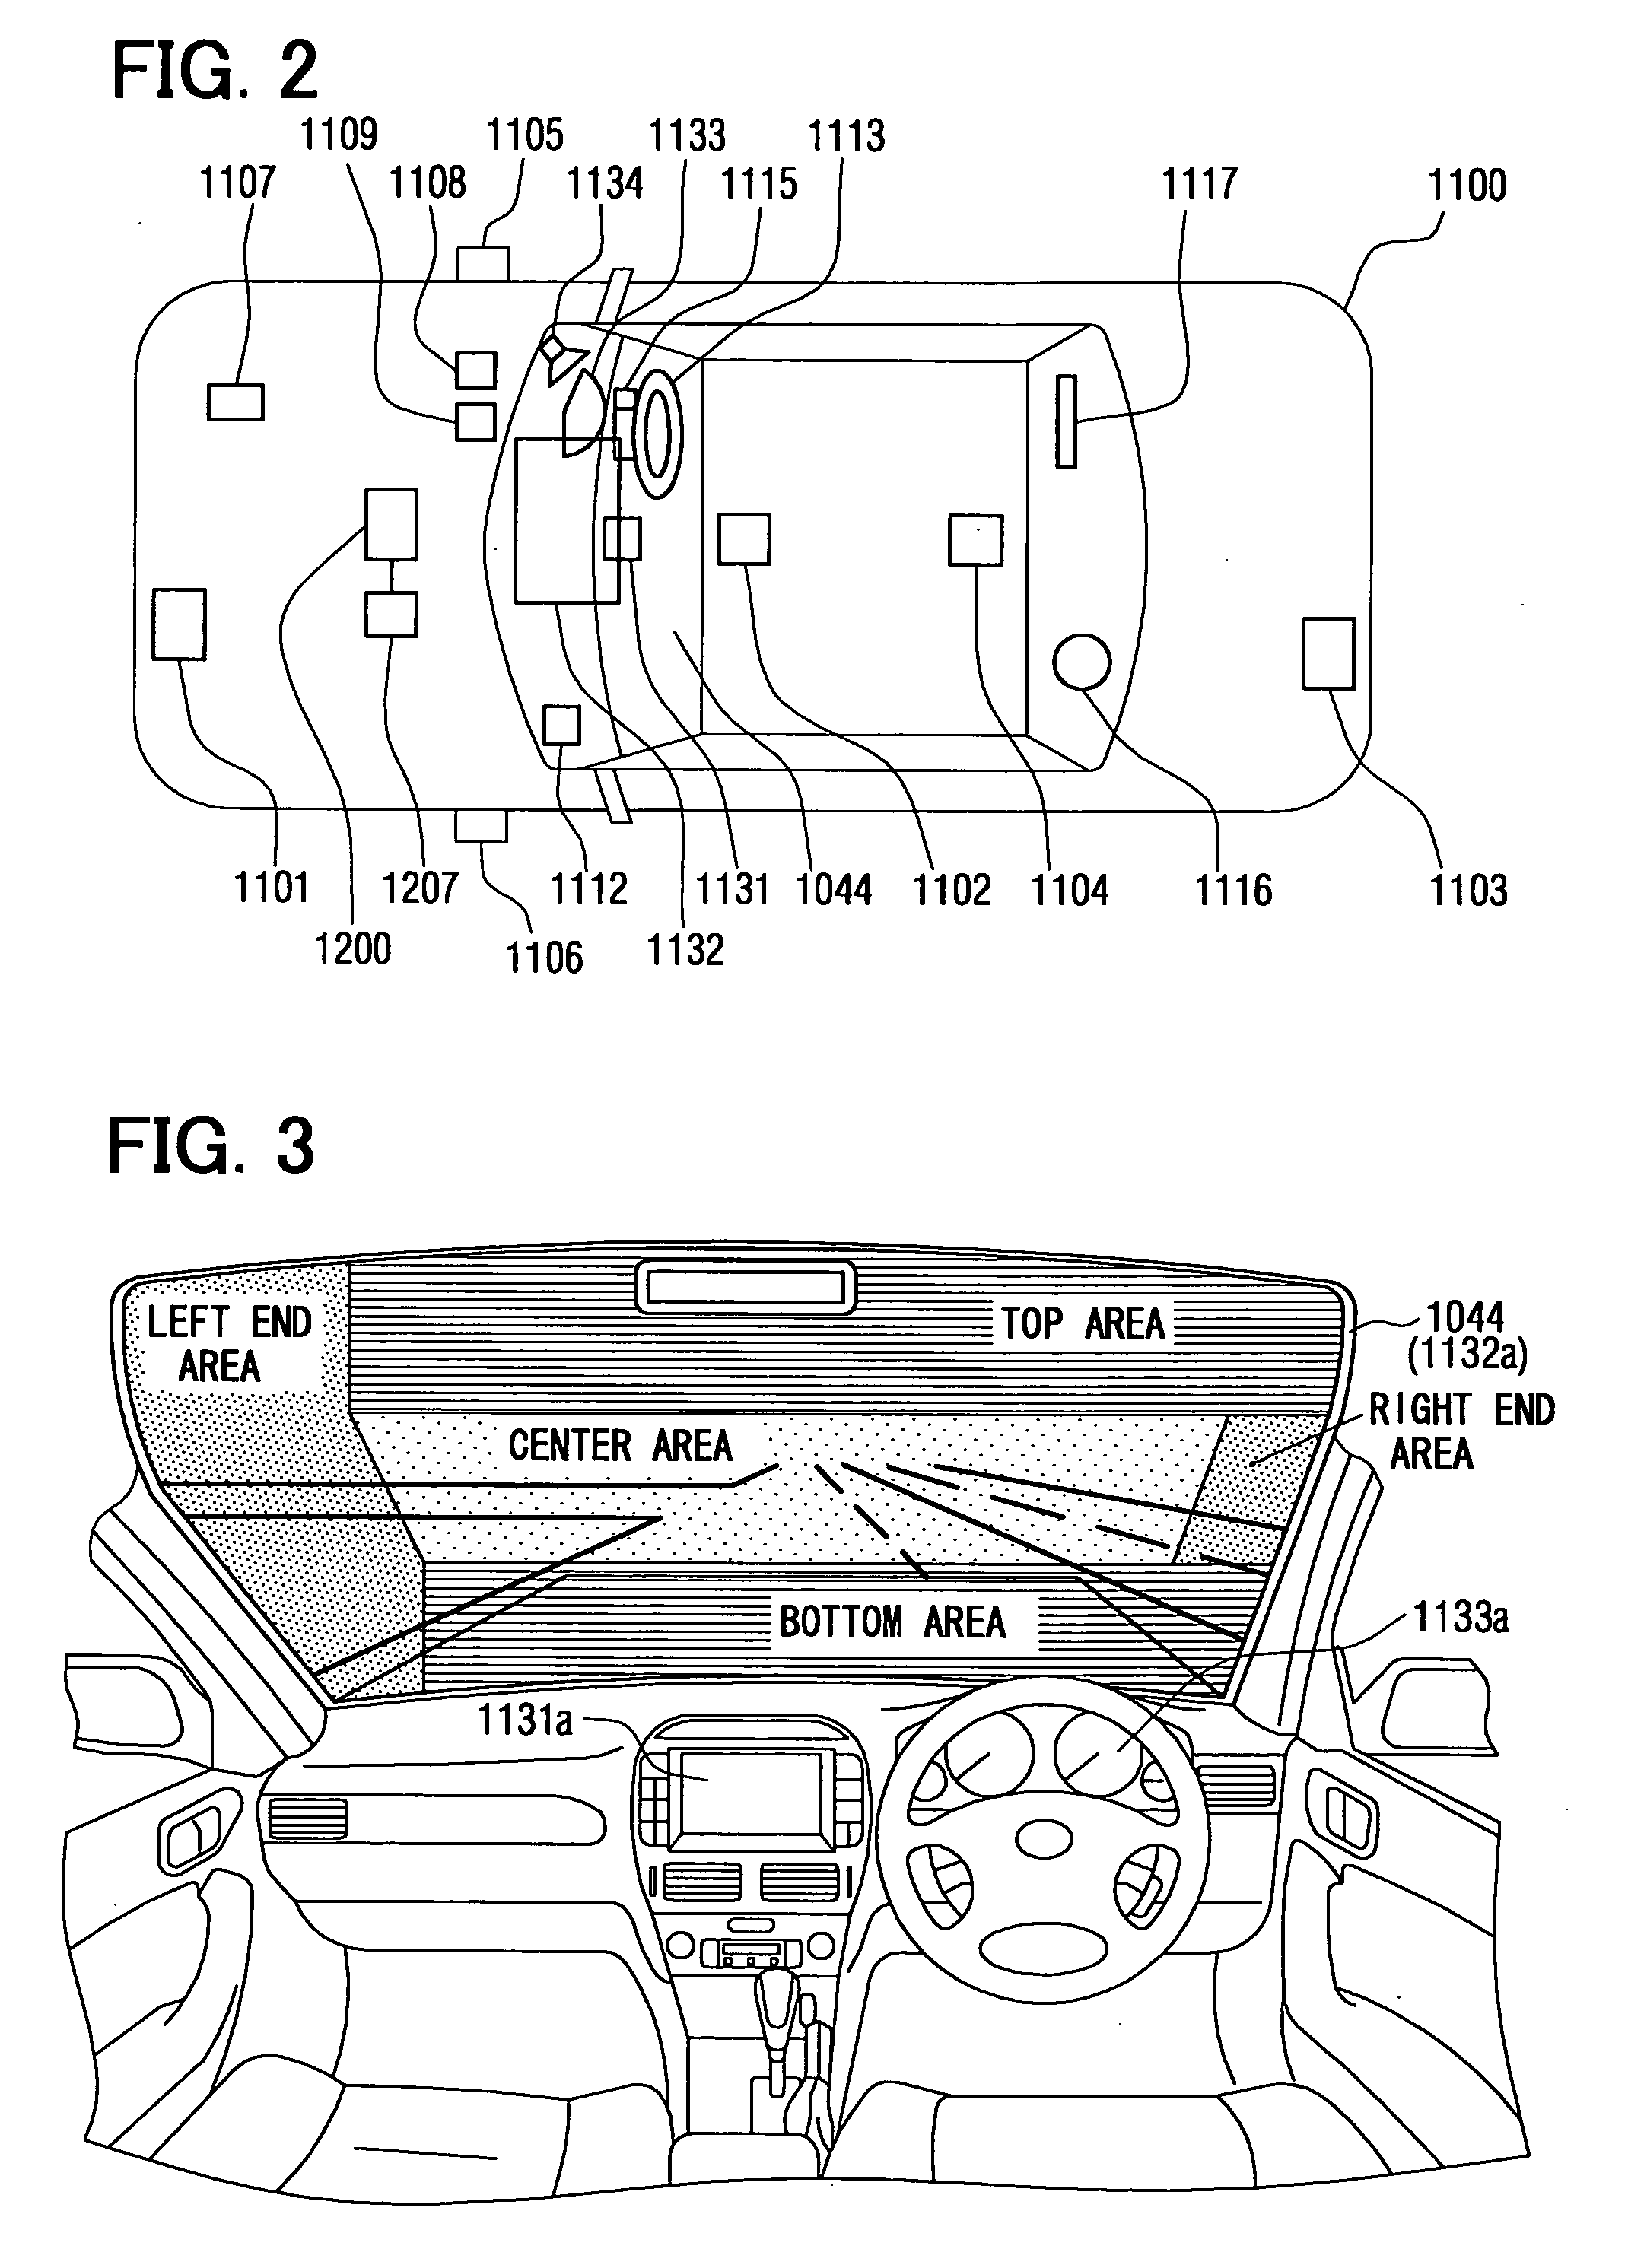 Vehicle information display system